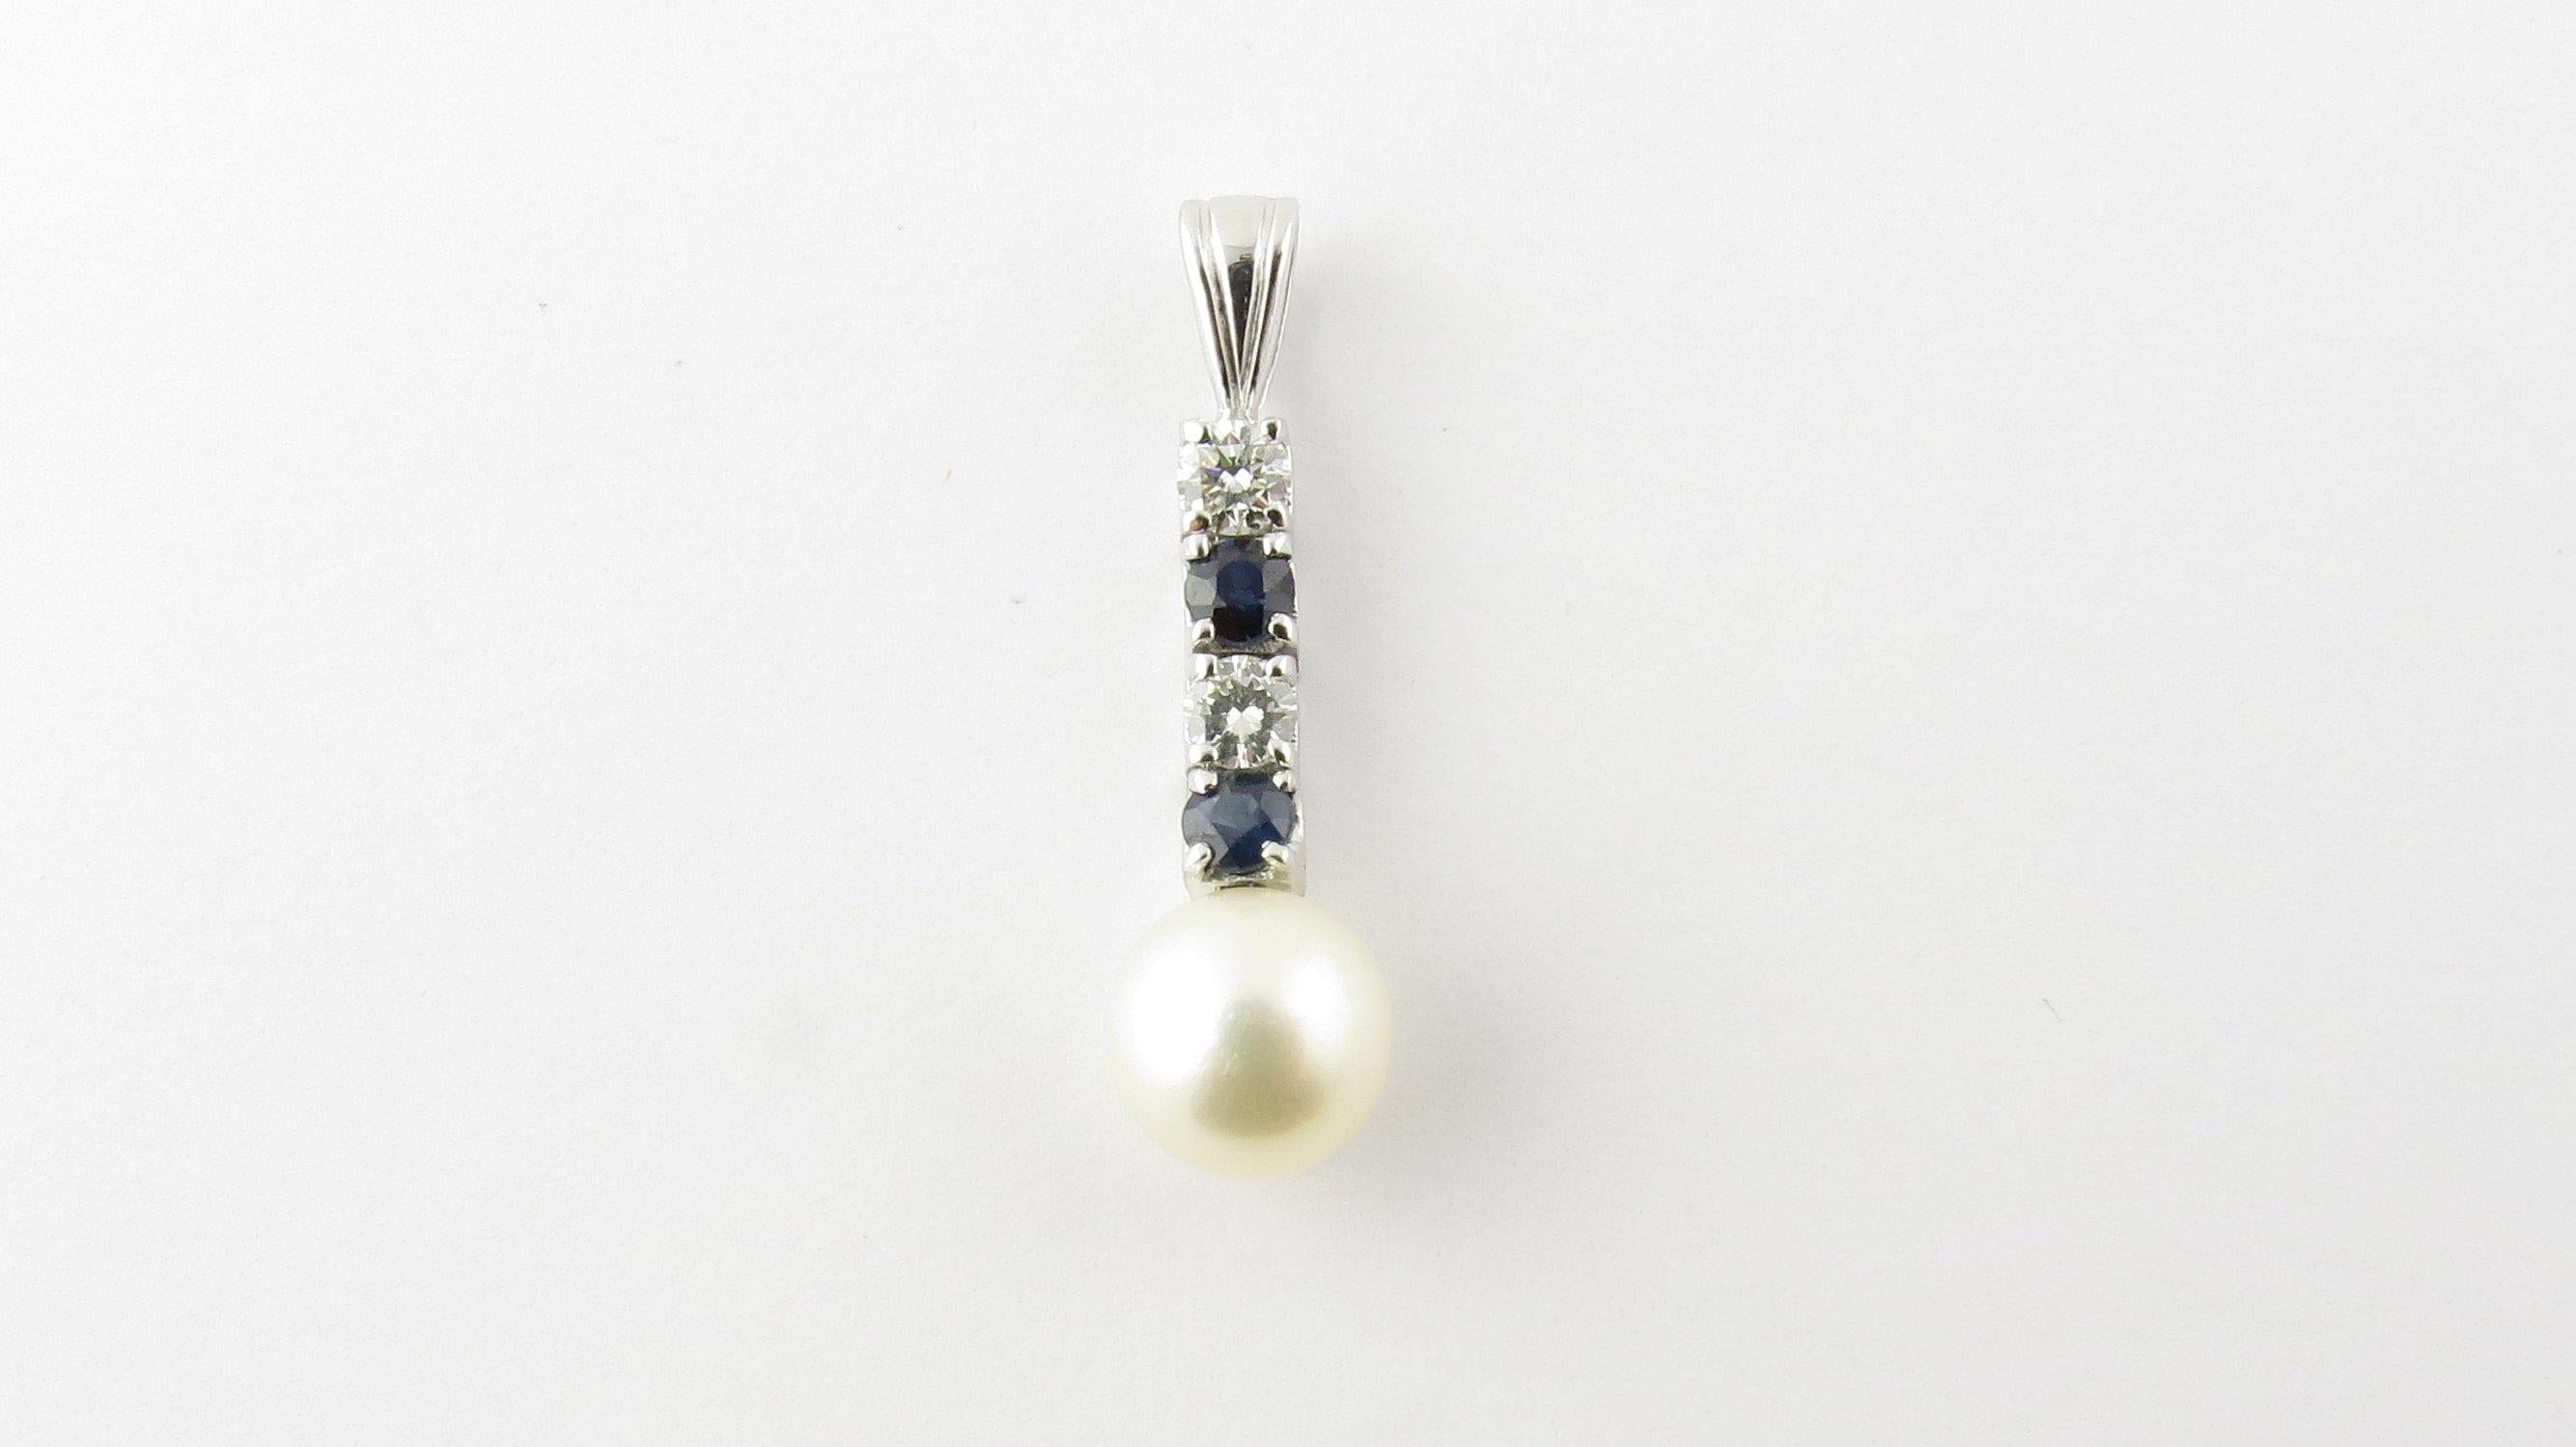 Vintage 14 Karat White Gold Pearl, Sapphire and Diamond Pendant- This lovely pendant features one cultured pearl (7.5 mm), two round genuine sapphires, and two round brilliant cut diamonds set in classic 14K white gold. Approximate total diamond